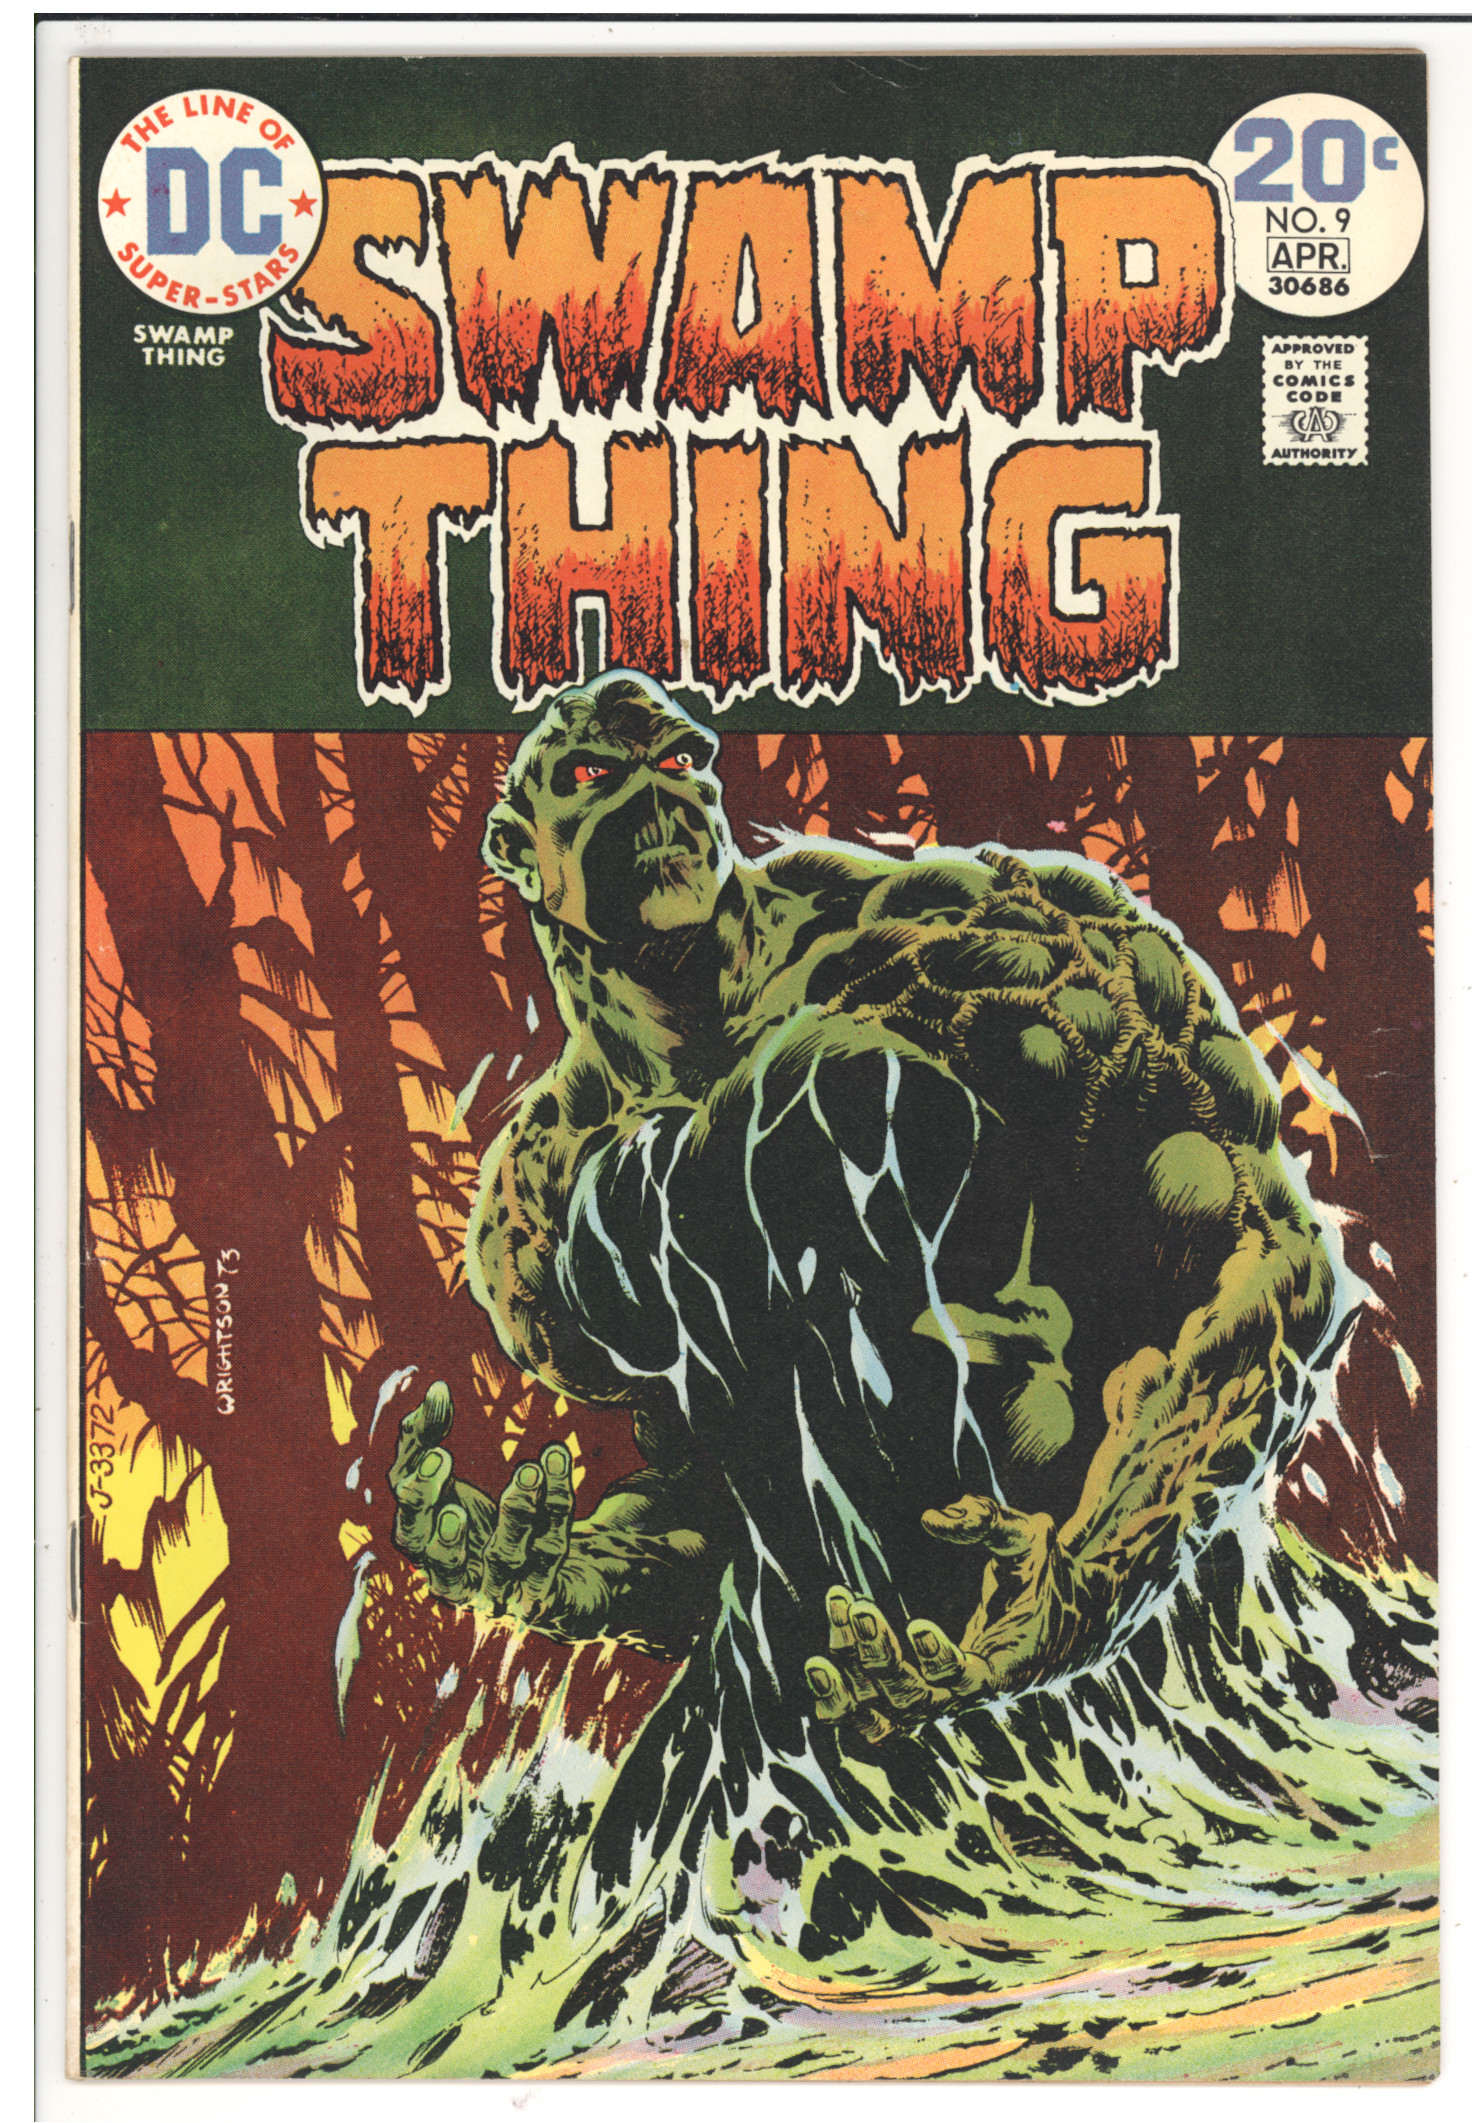 Swamp Thing #9 front